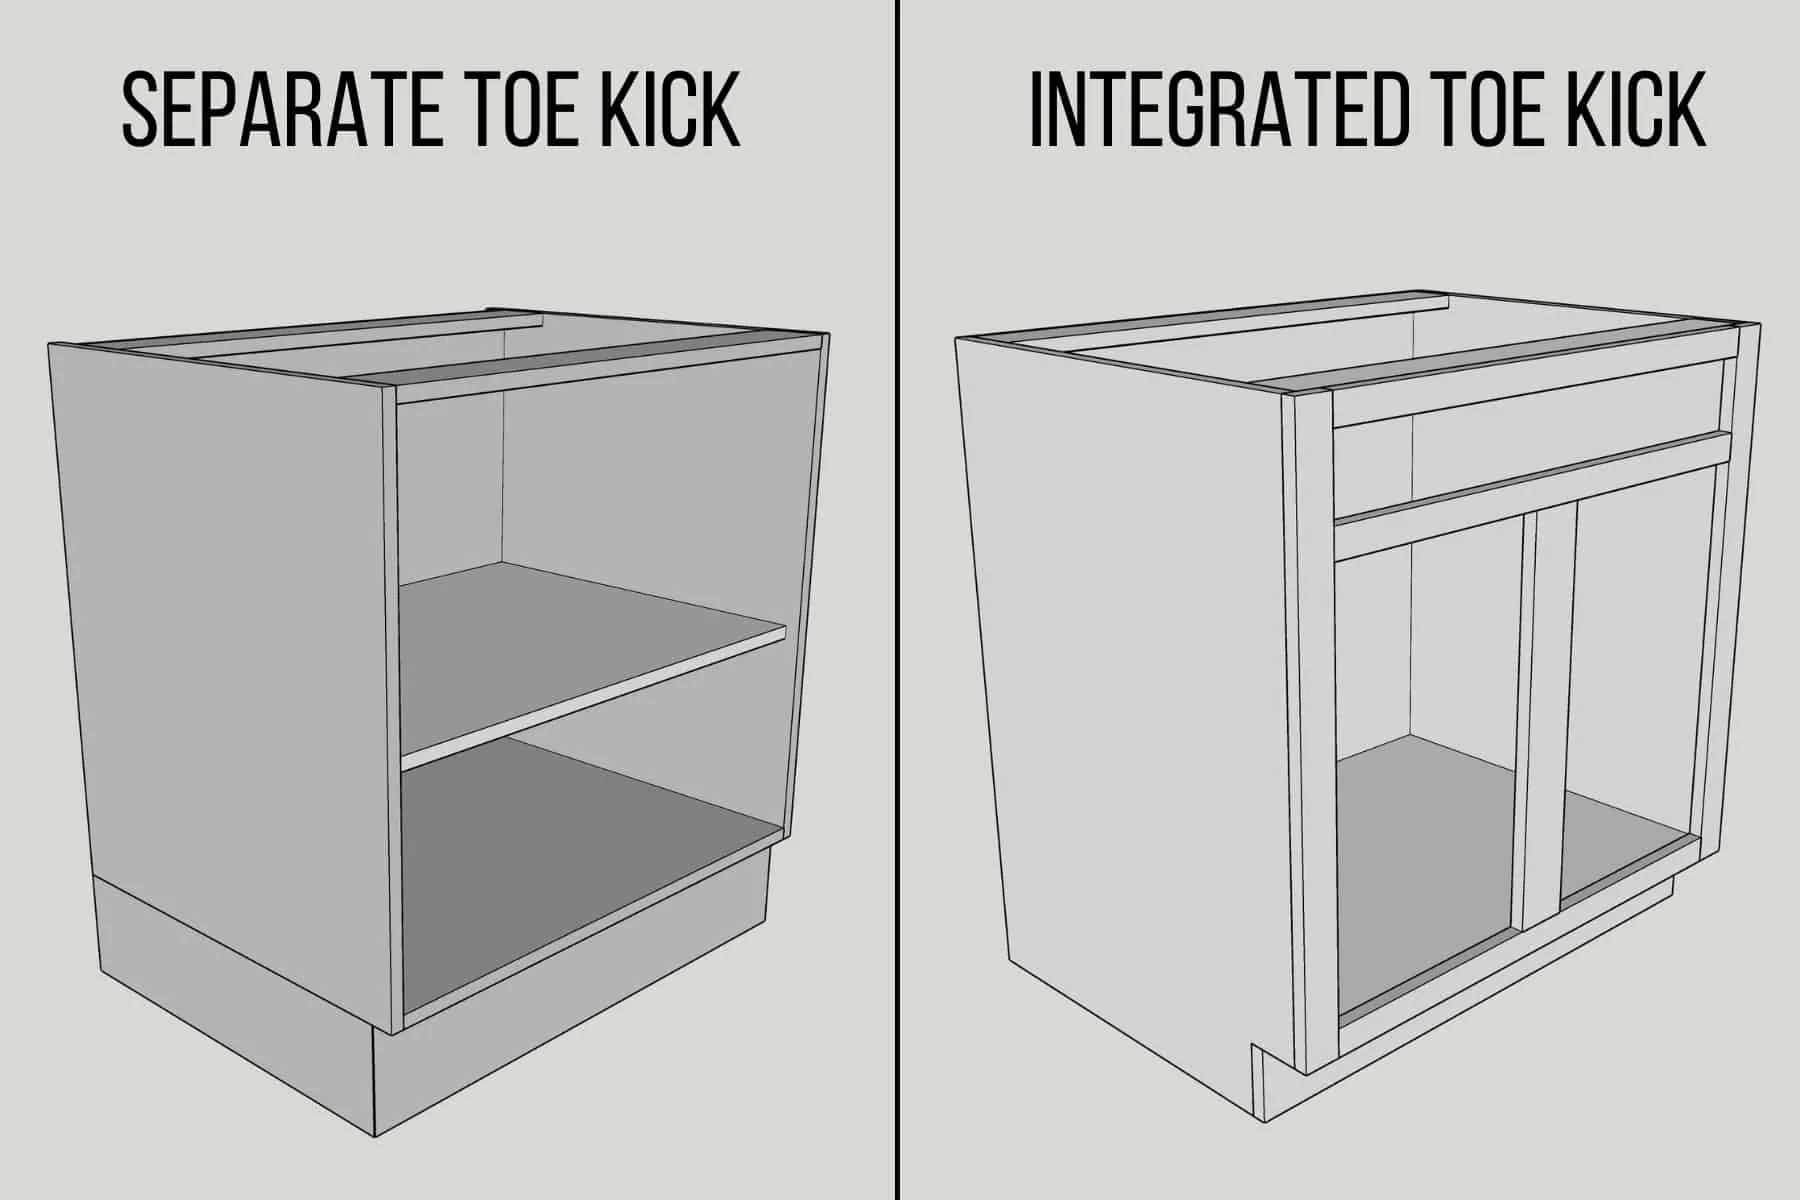 two different cabinet toe kick styles - separate toe kick and integrated toe kick